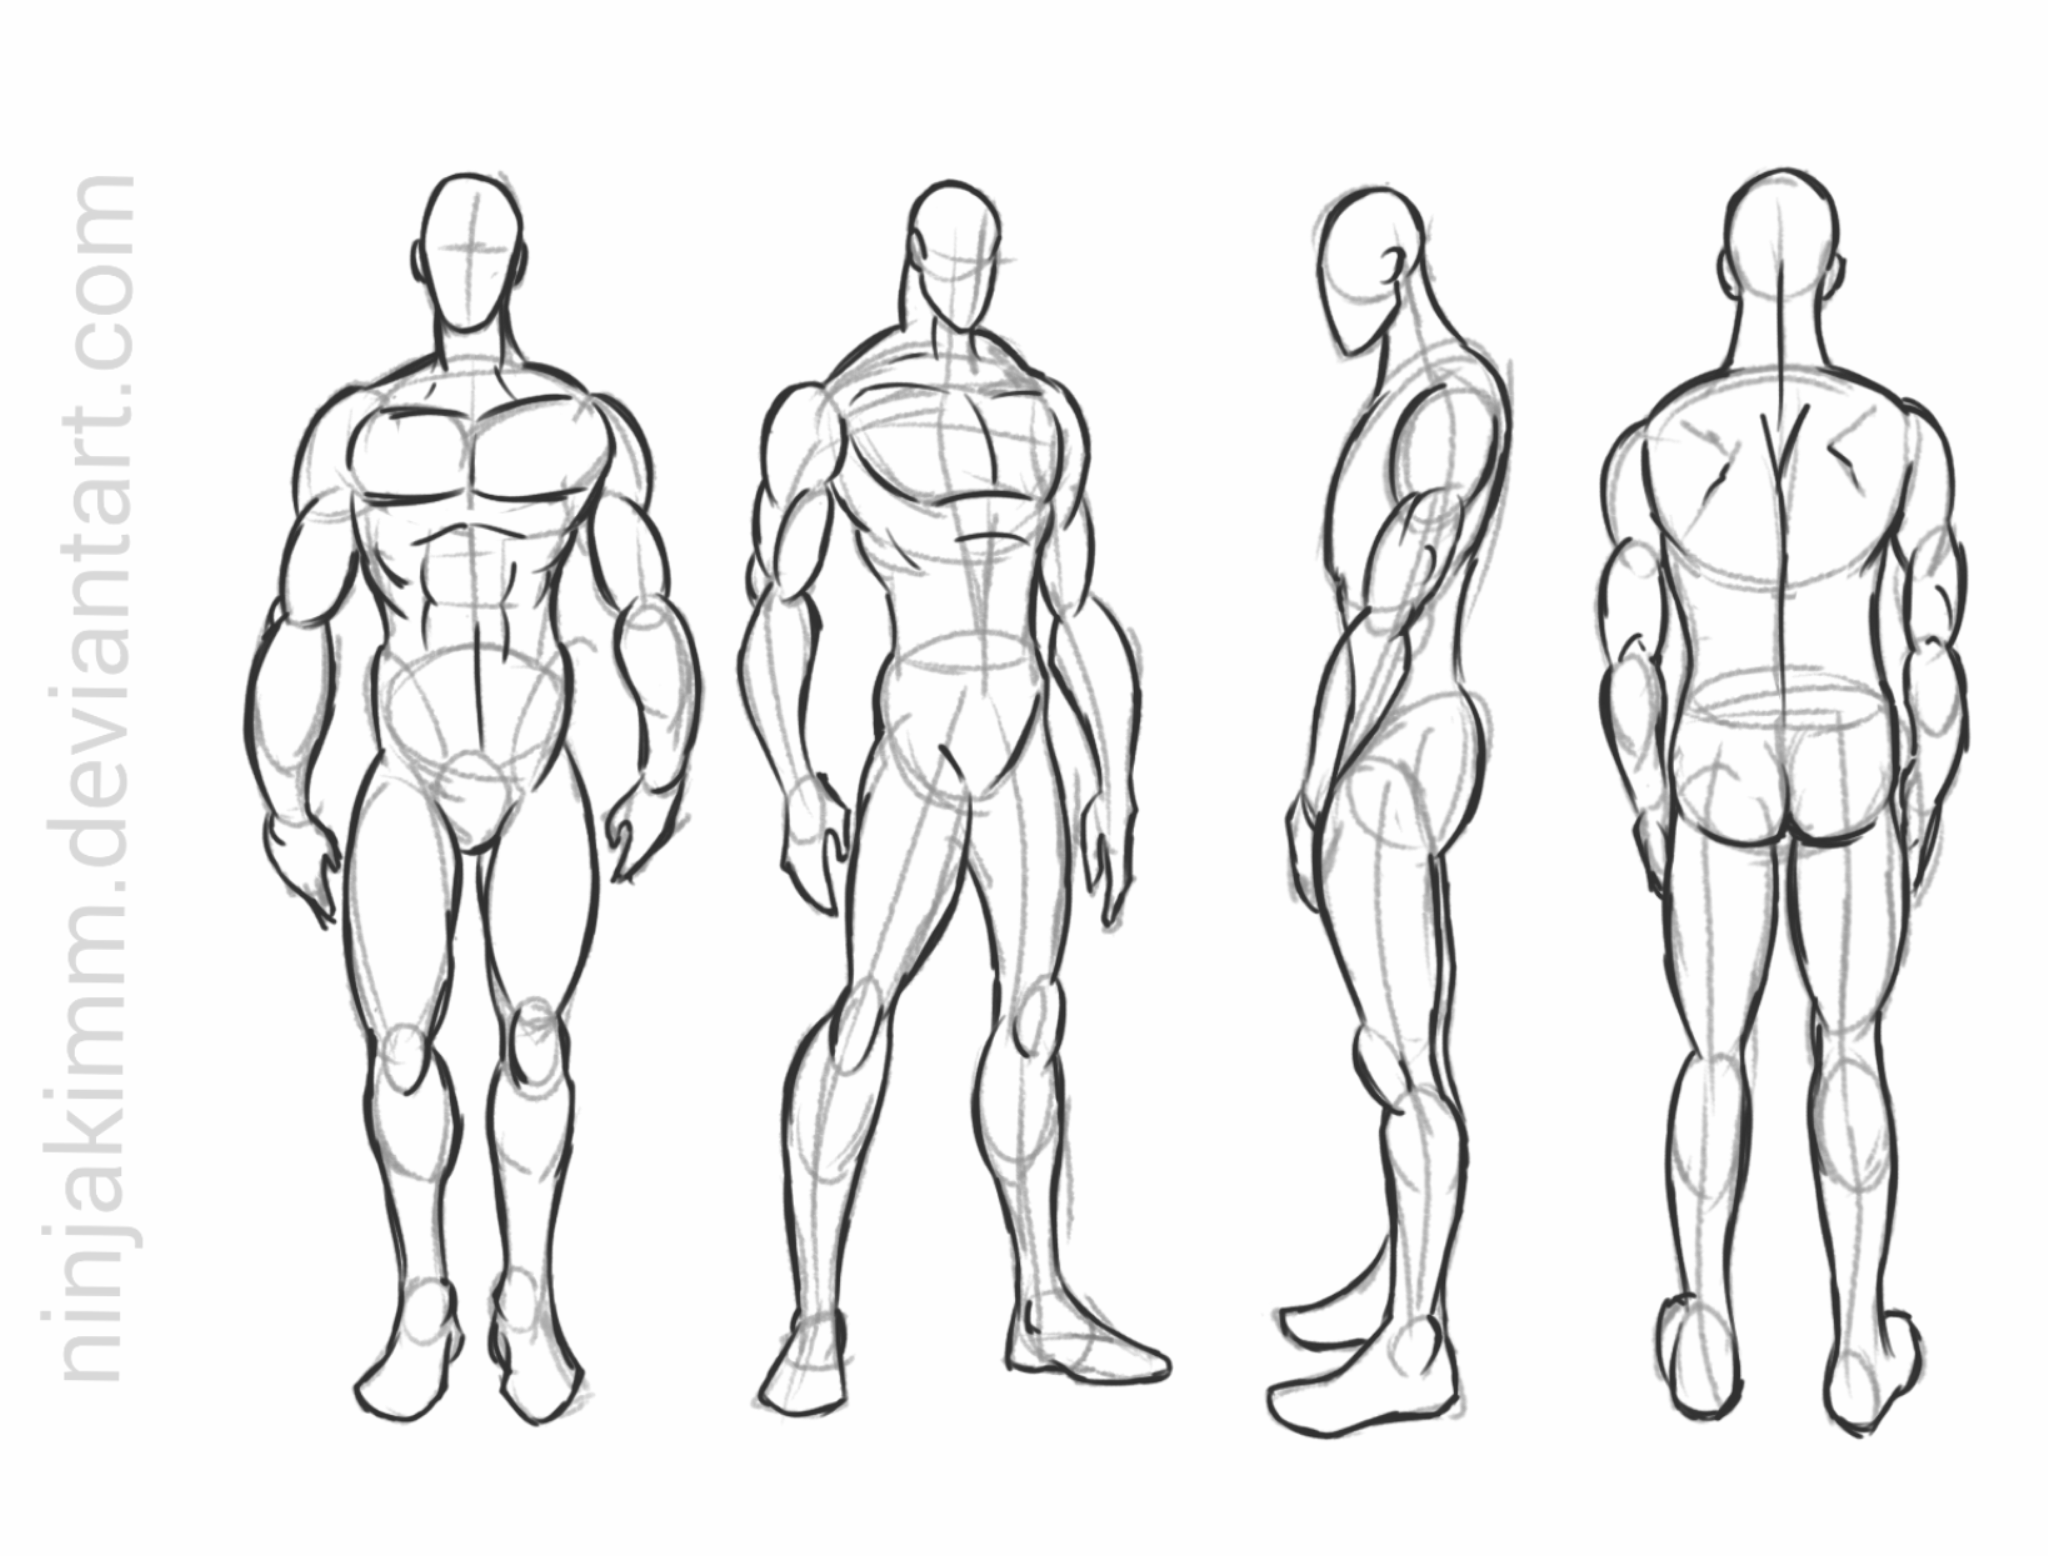 male standing pose (commission sketch) by ninjakimm on DeviantArt